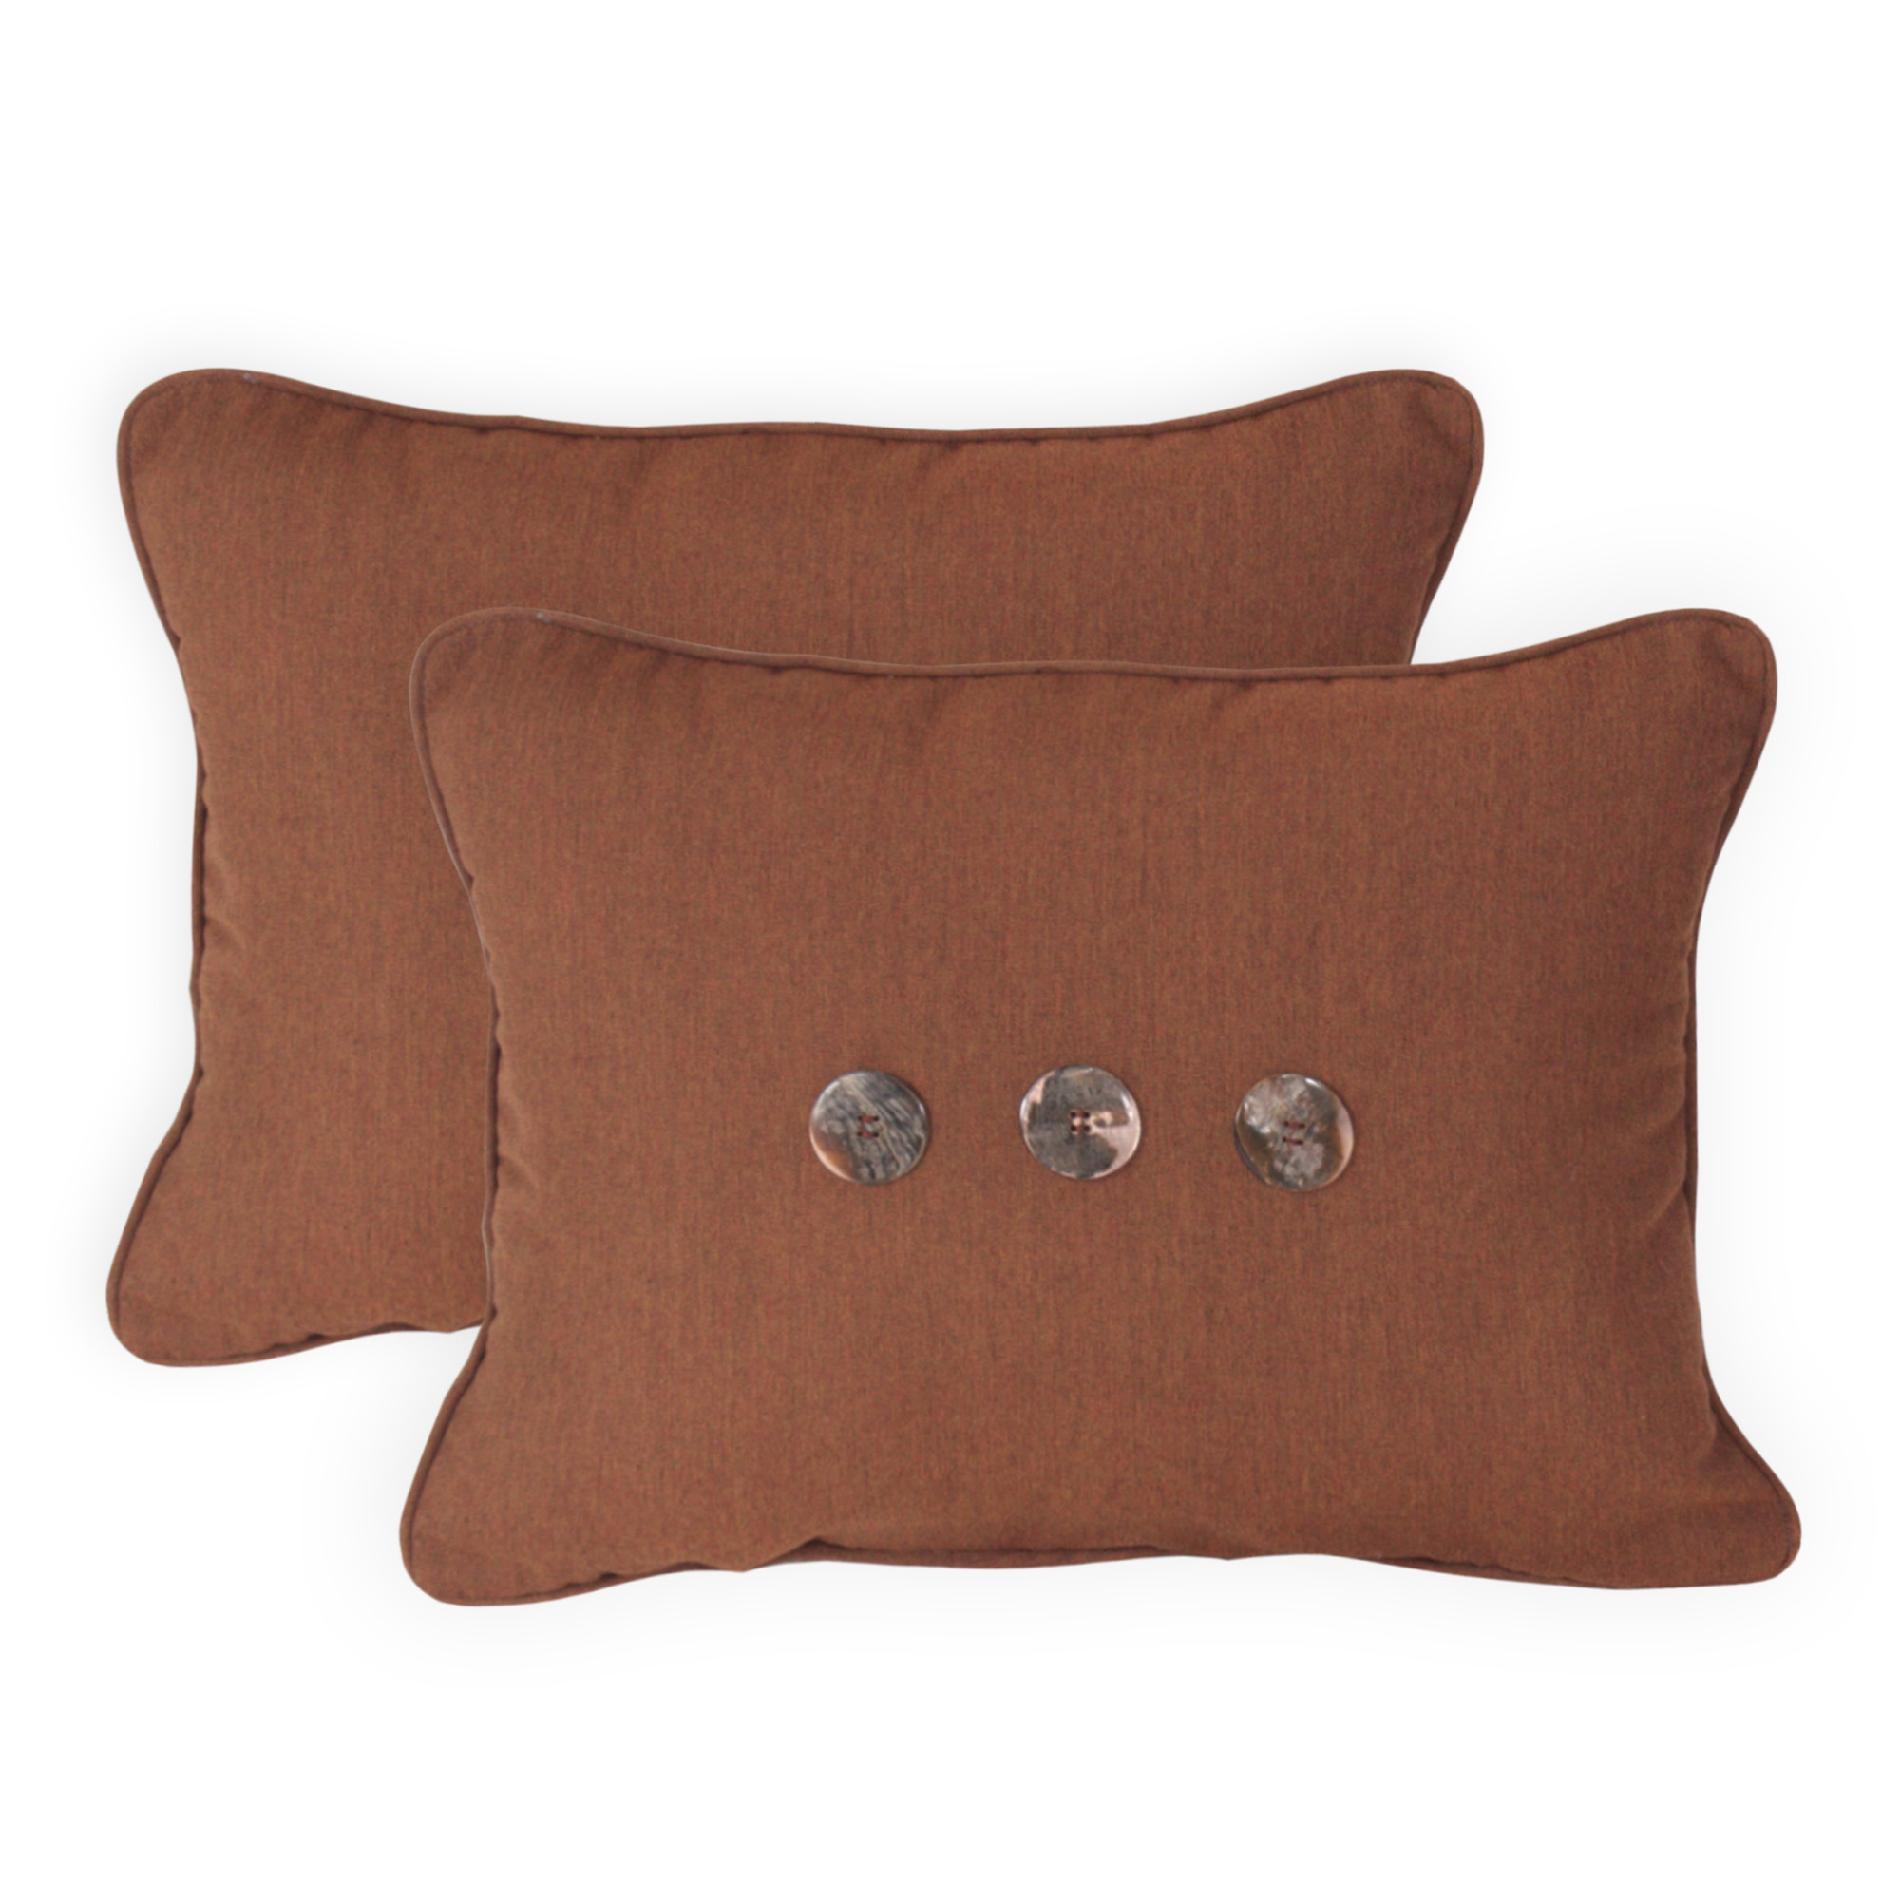 Pack of 2 Deluxe (16" x 20") Three Button Pillows - Color:  Canvas Teak